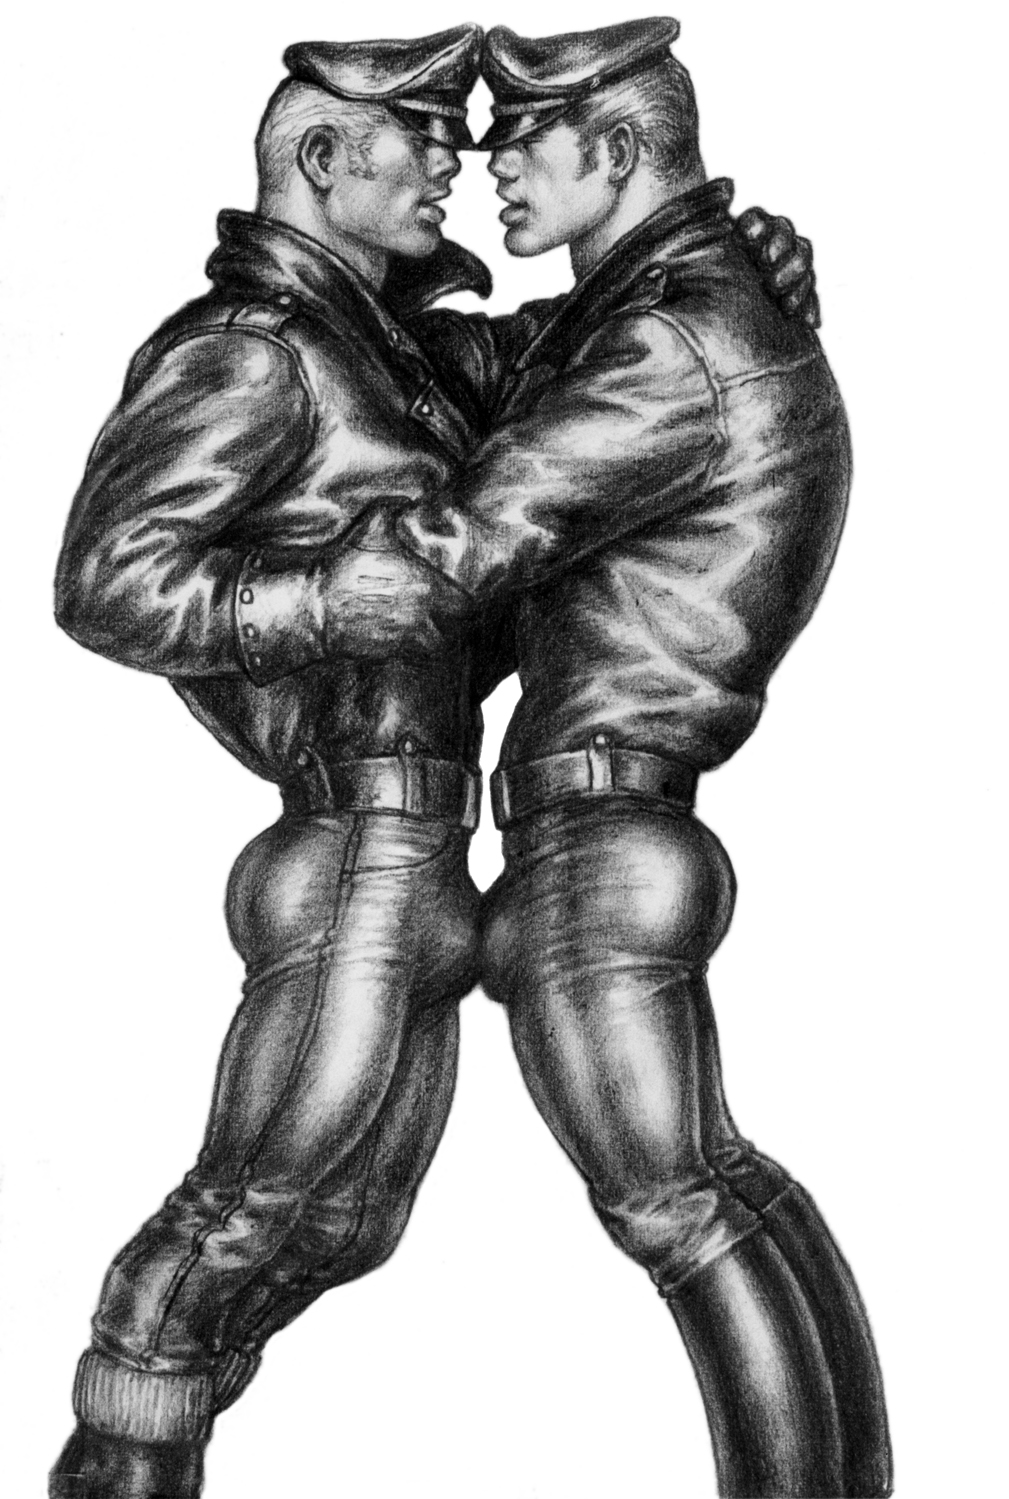 All images courtesy of the tom of finland foundation. 